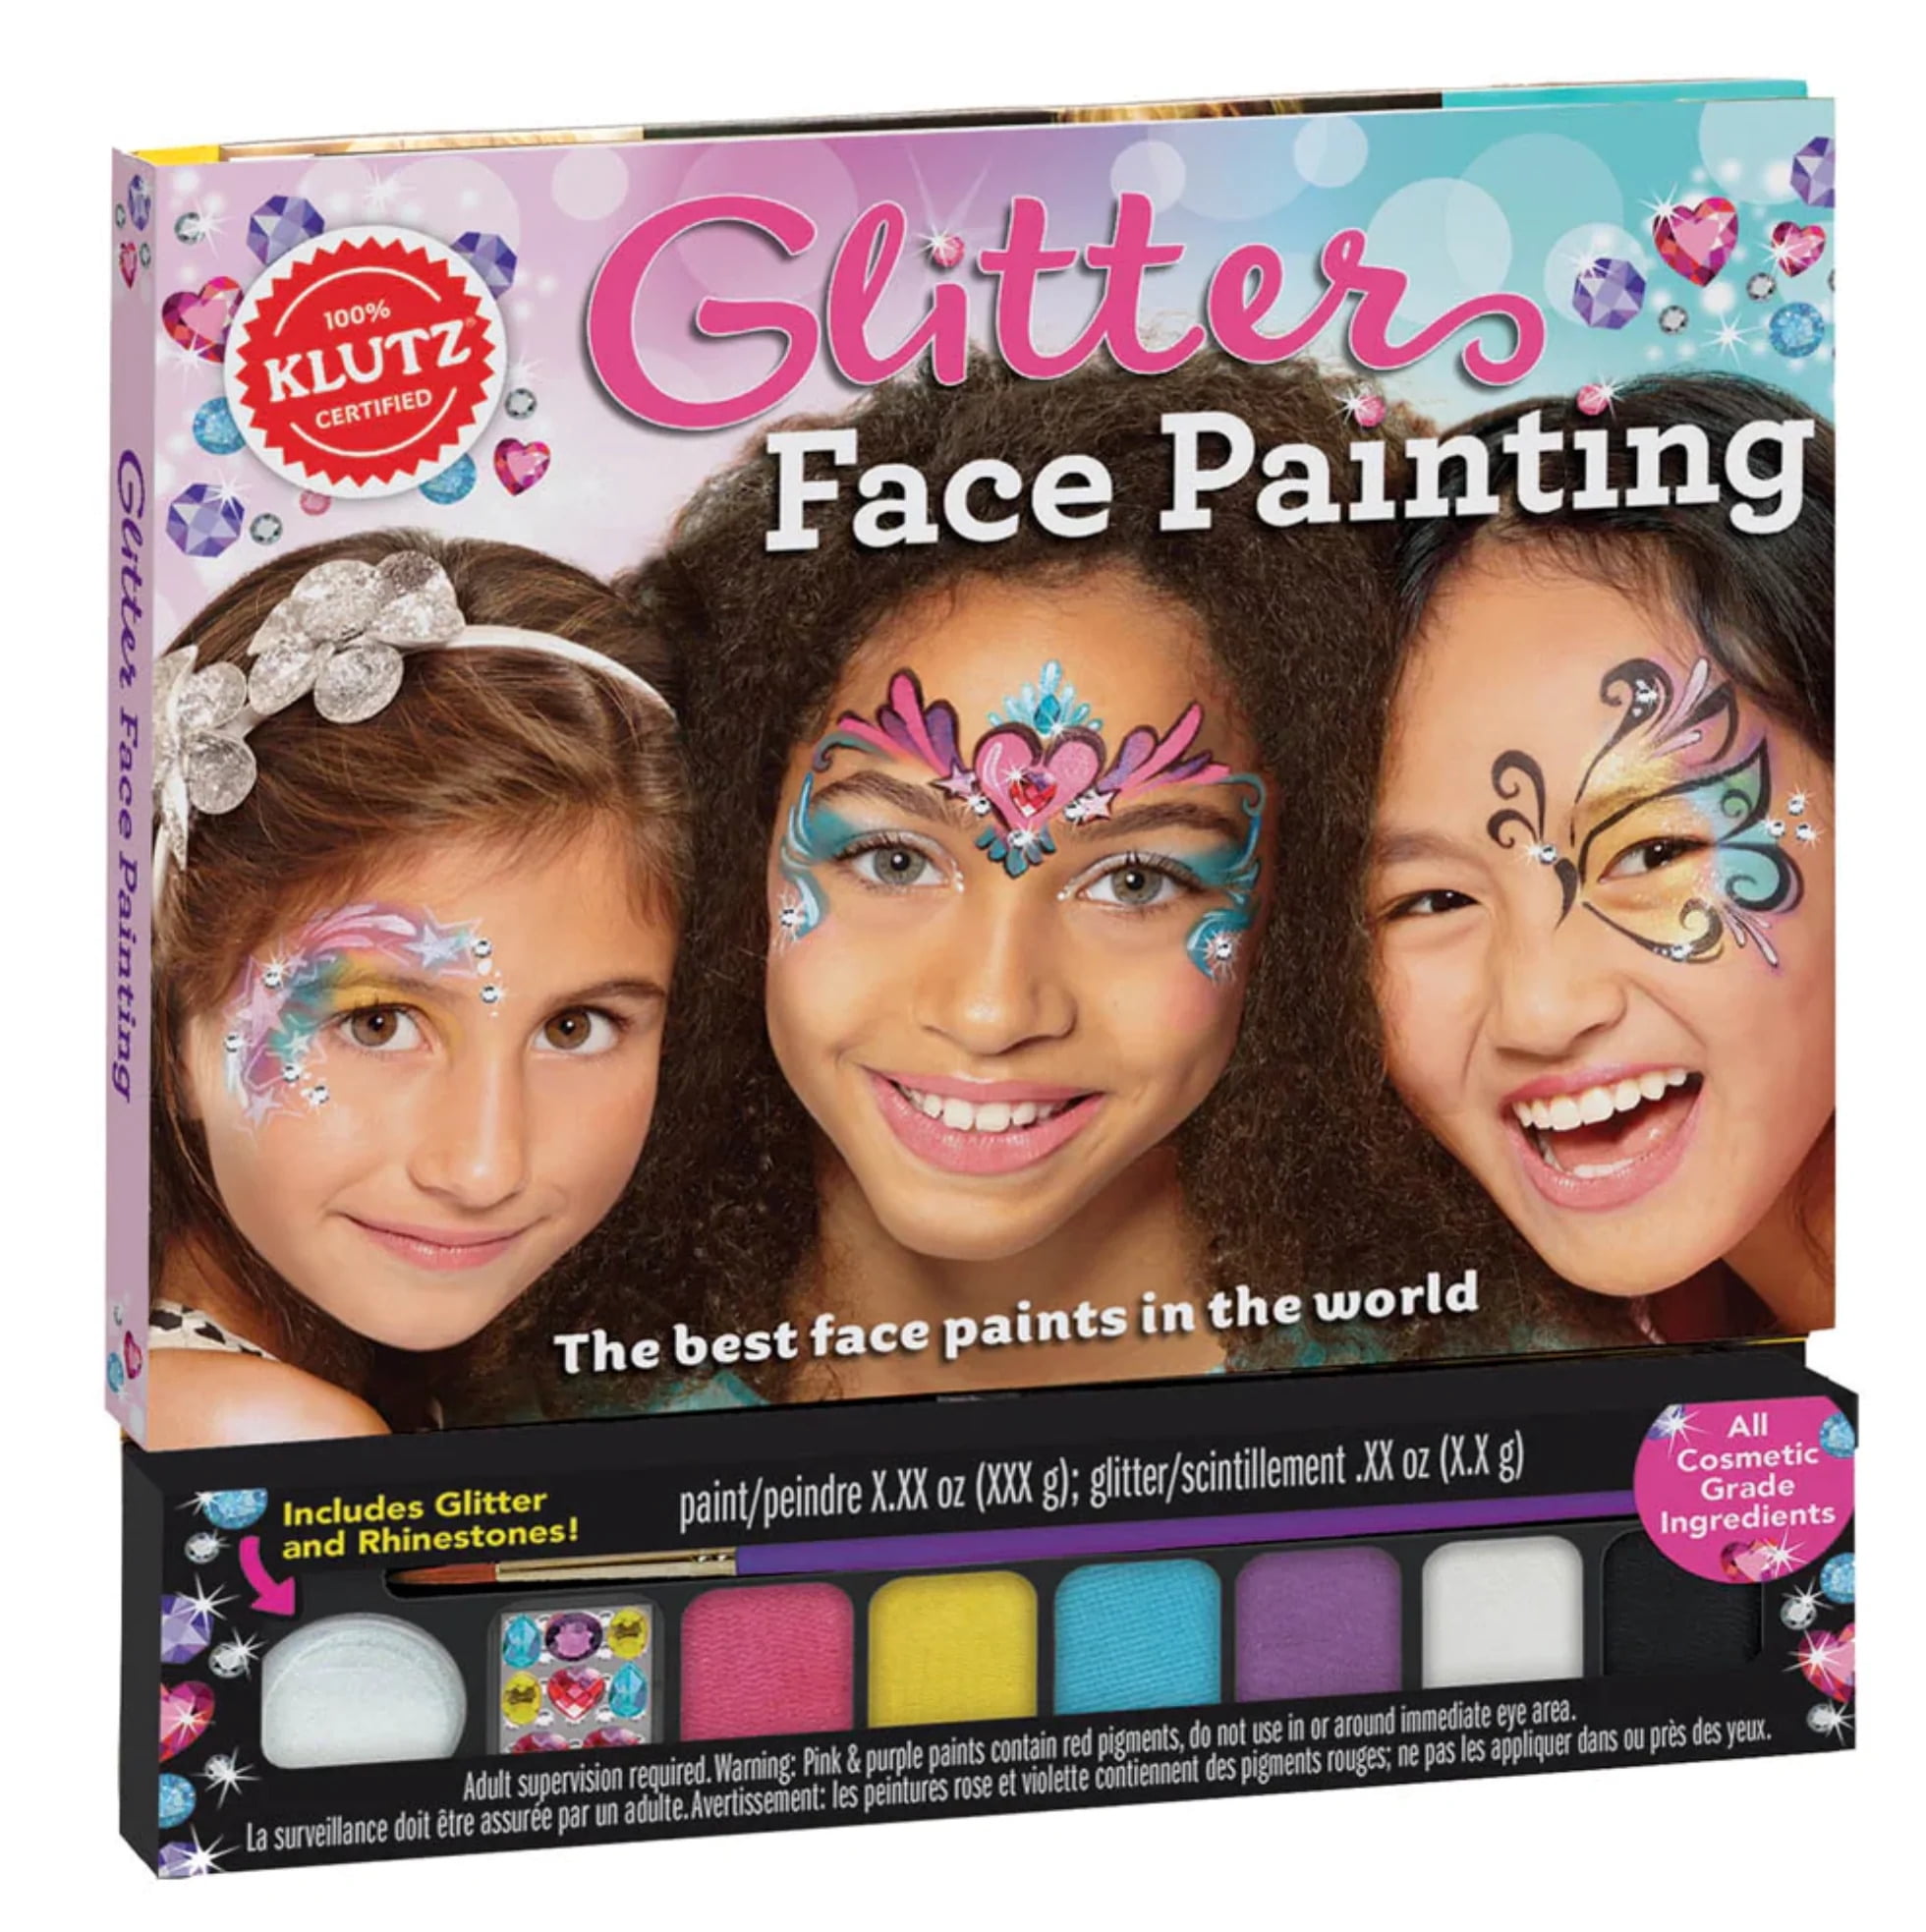 Maydear Face Painting Kit for Kids with 12 Colors Safe and Non-Toxic Large  Water Based Face Paint (Pearl) 